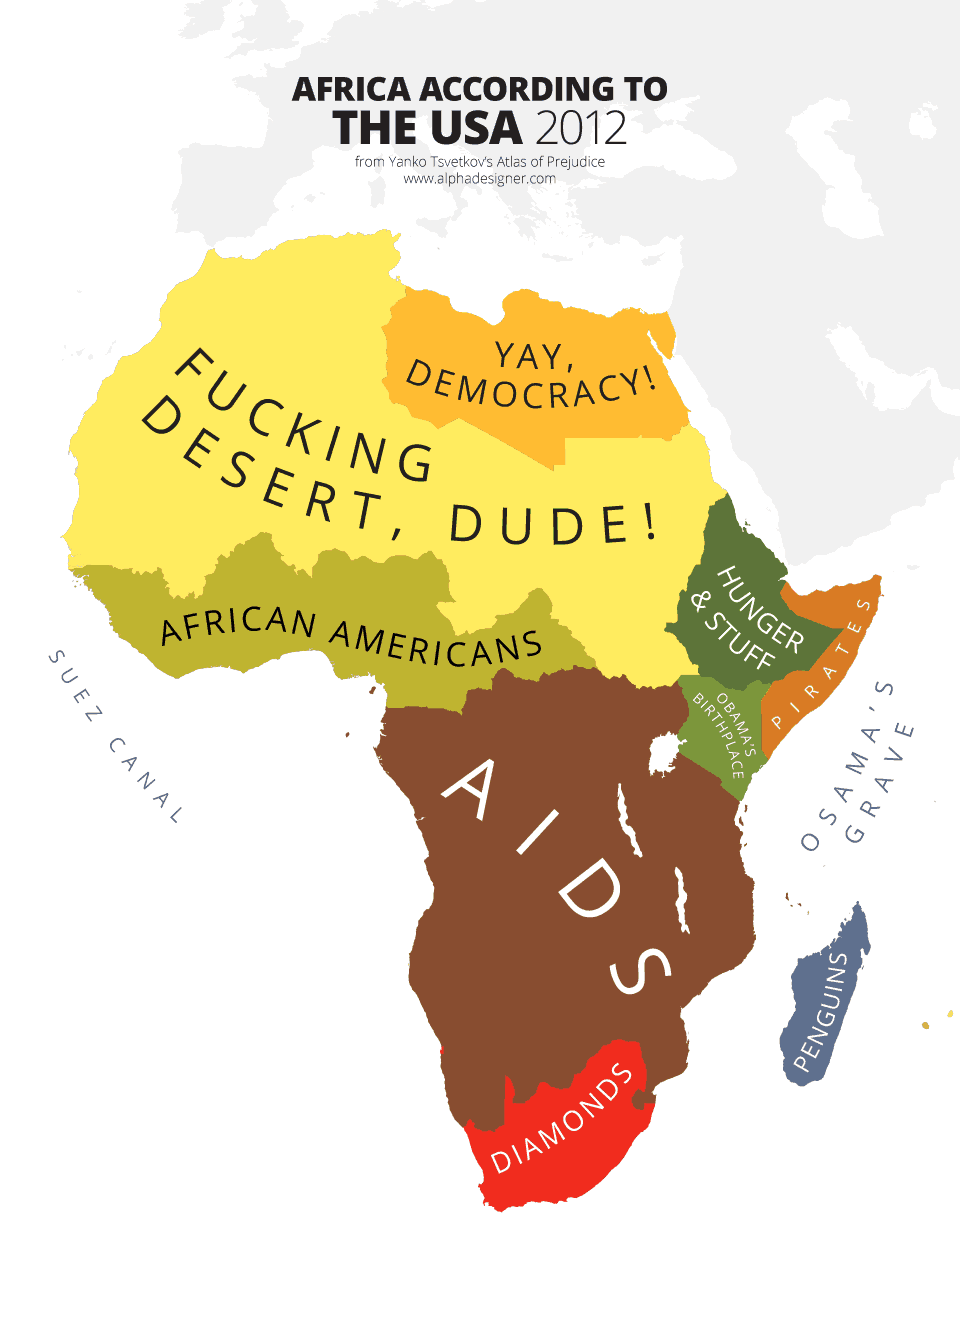 Map of Africa According to USA